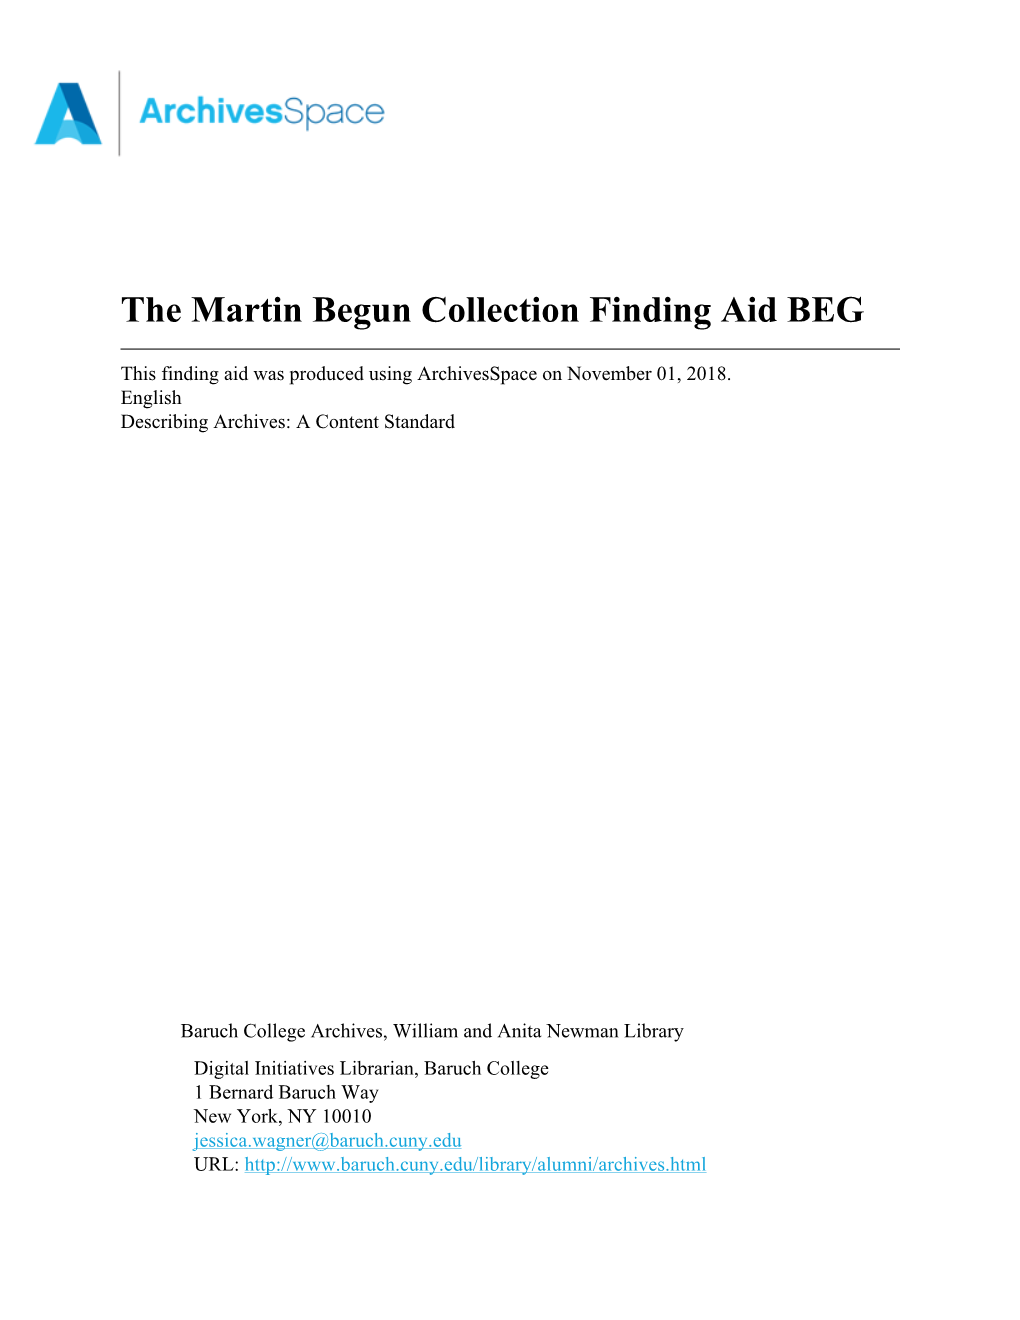 The Martin Begun Collection Finding Aid BEG